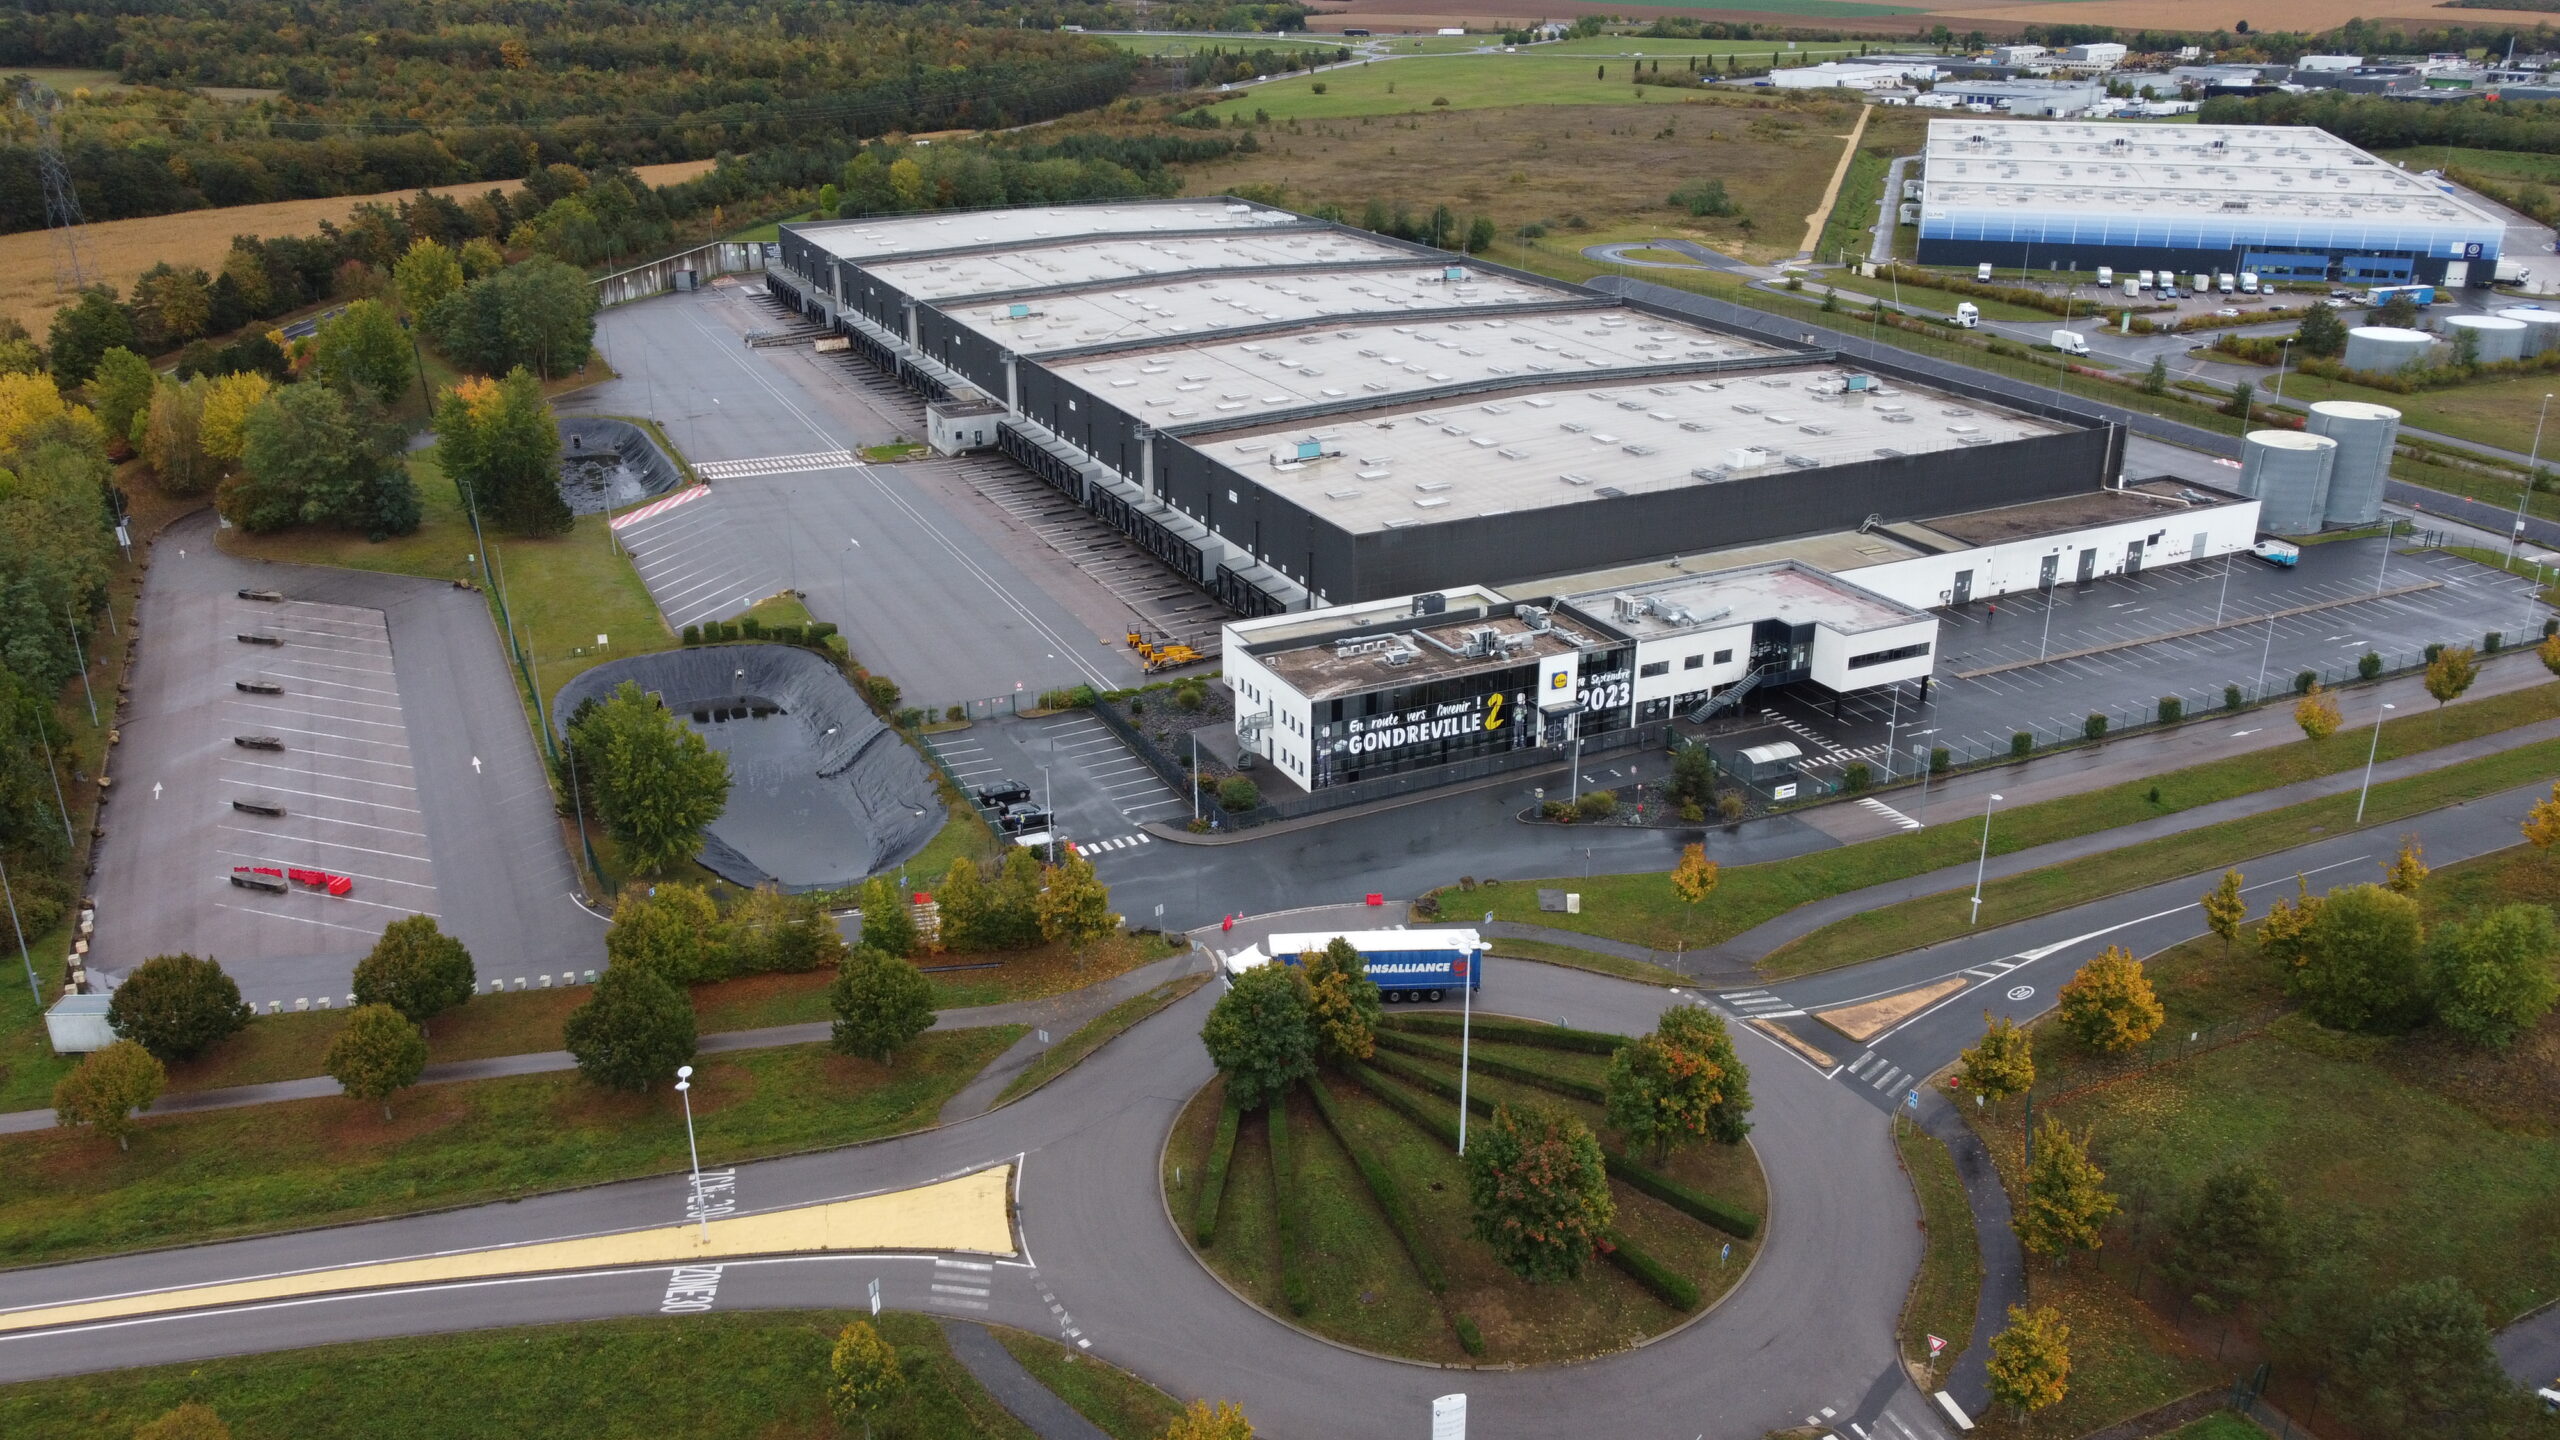 Scannell Properties leases 26,900 square metre logistics platform to The Jacky Perrenot Group in Gondreville, France